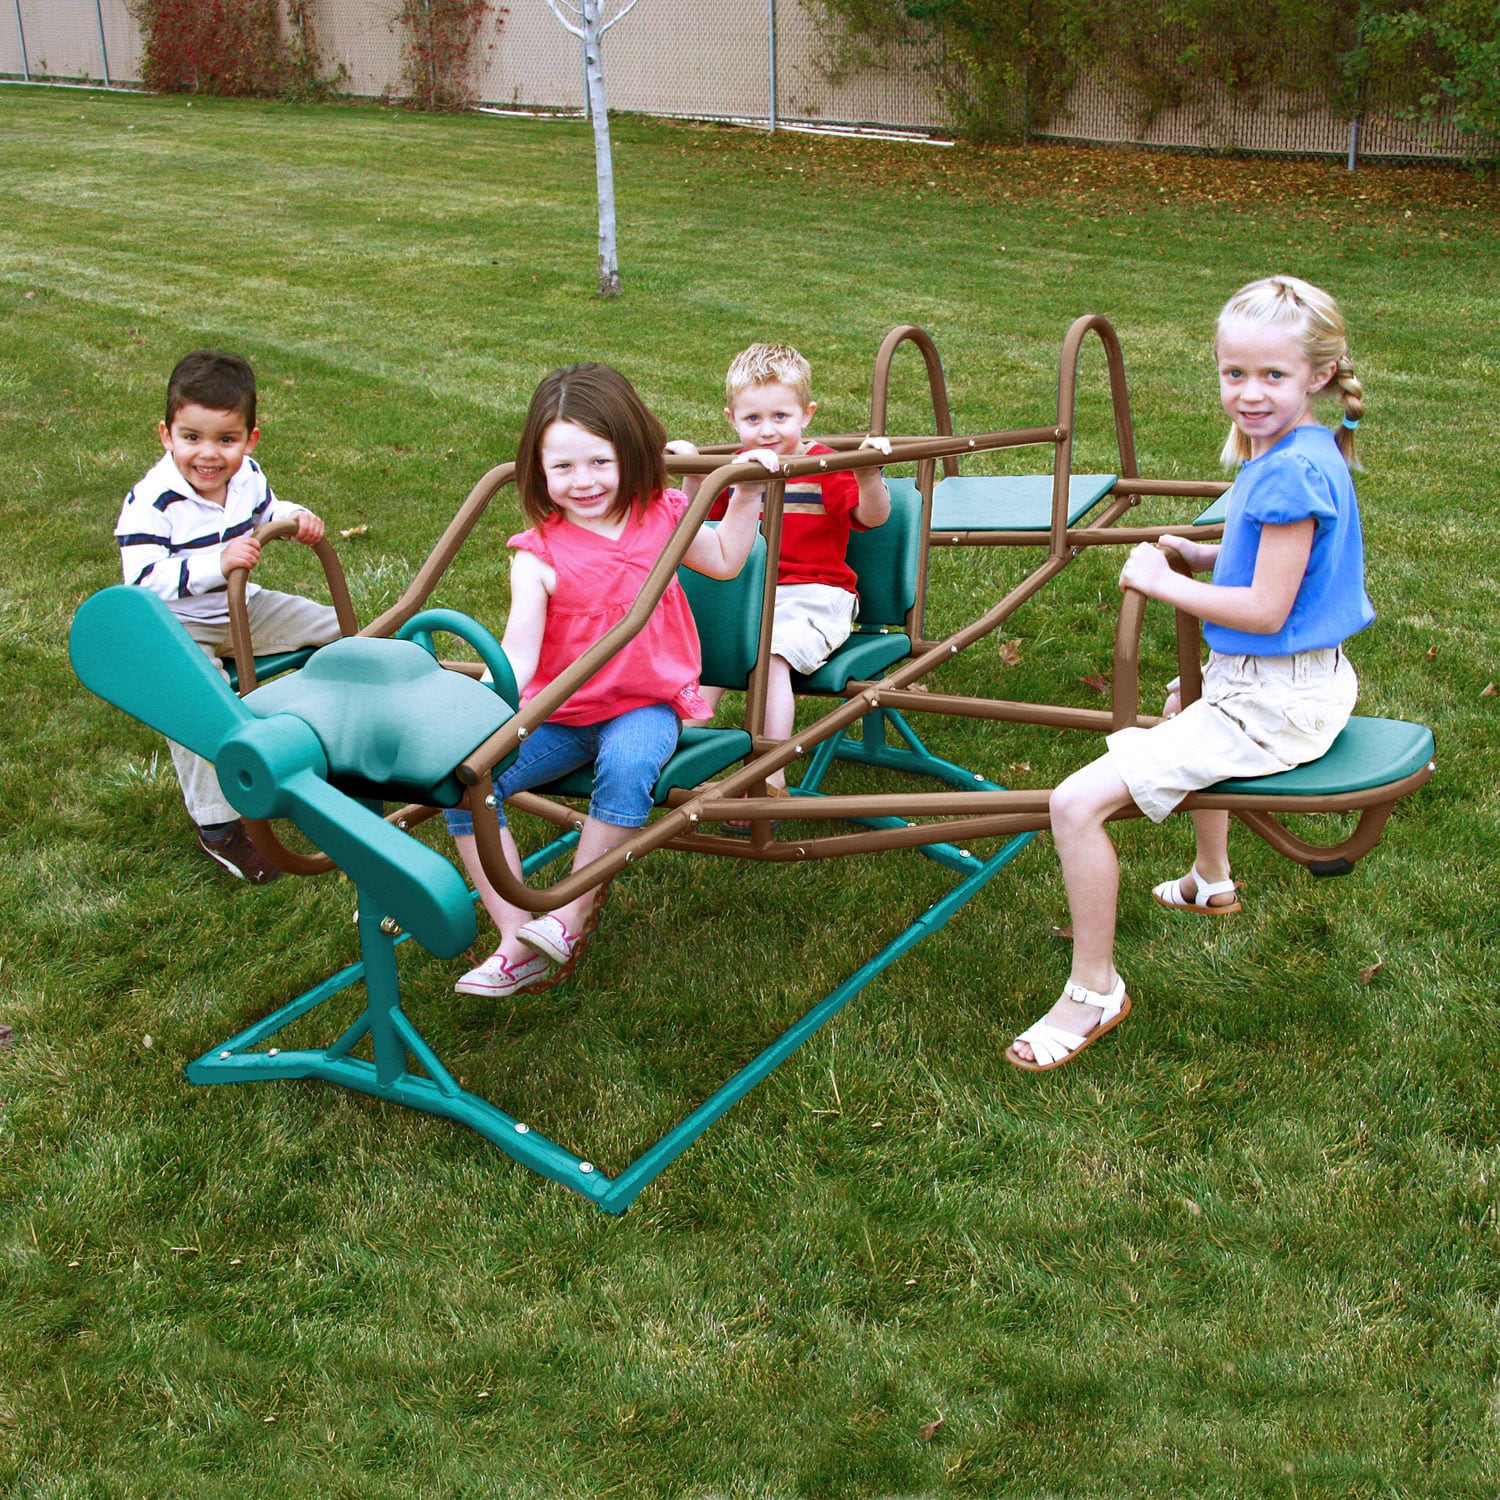 Lifetime Ace Flyer Multi-color Airplane Outdoor Teeter-totter